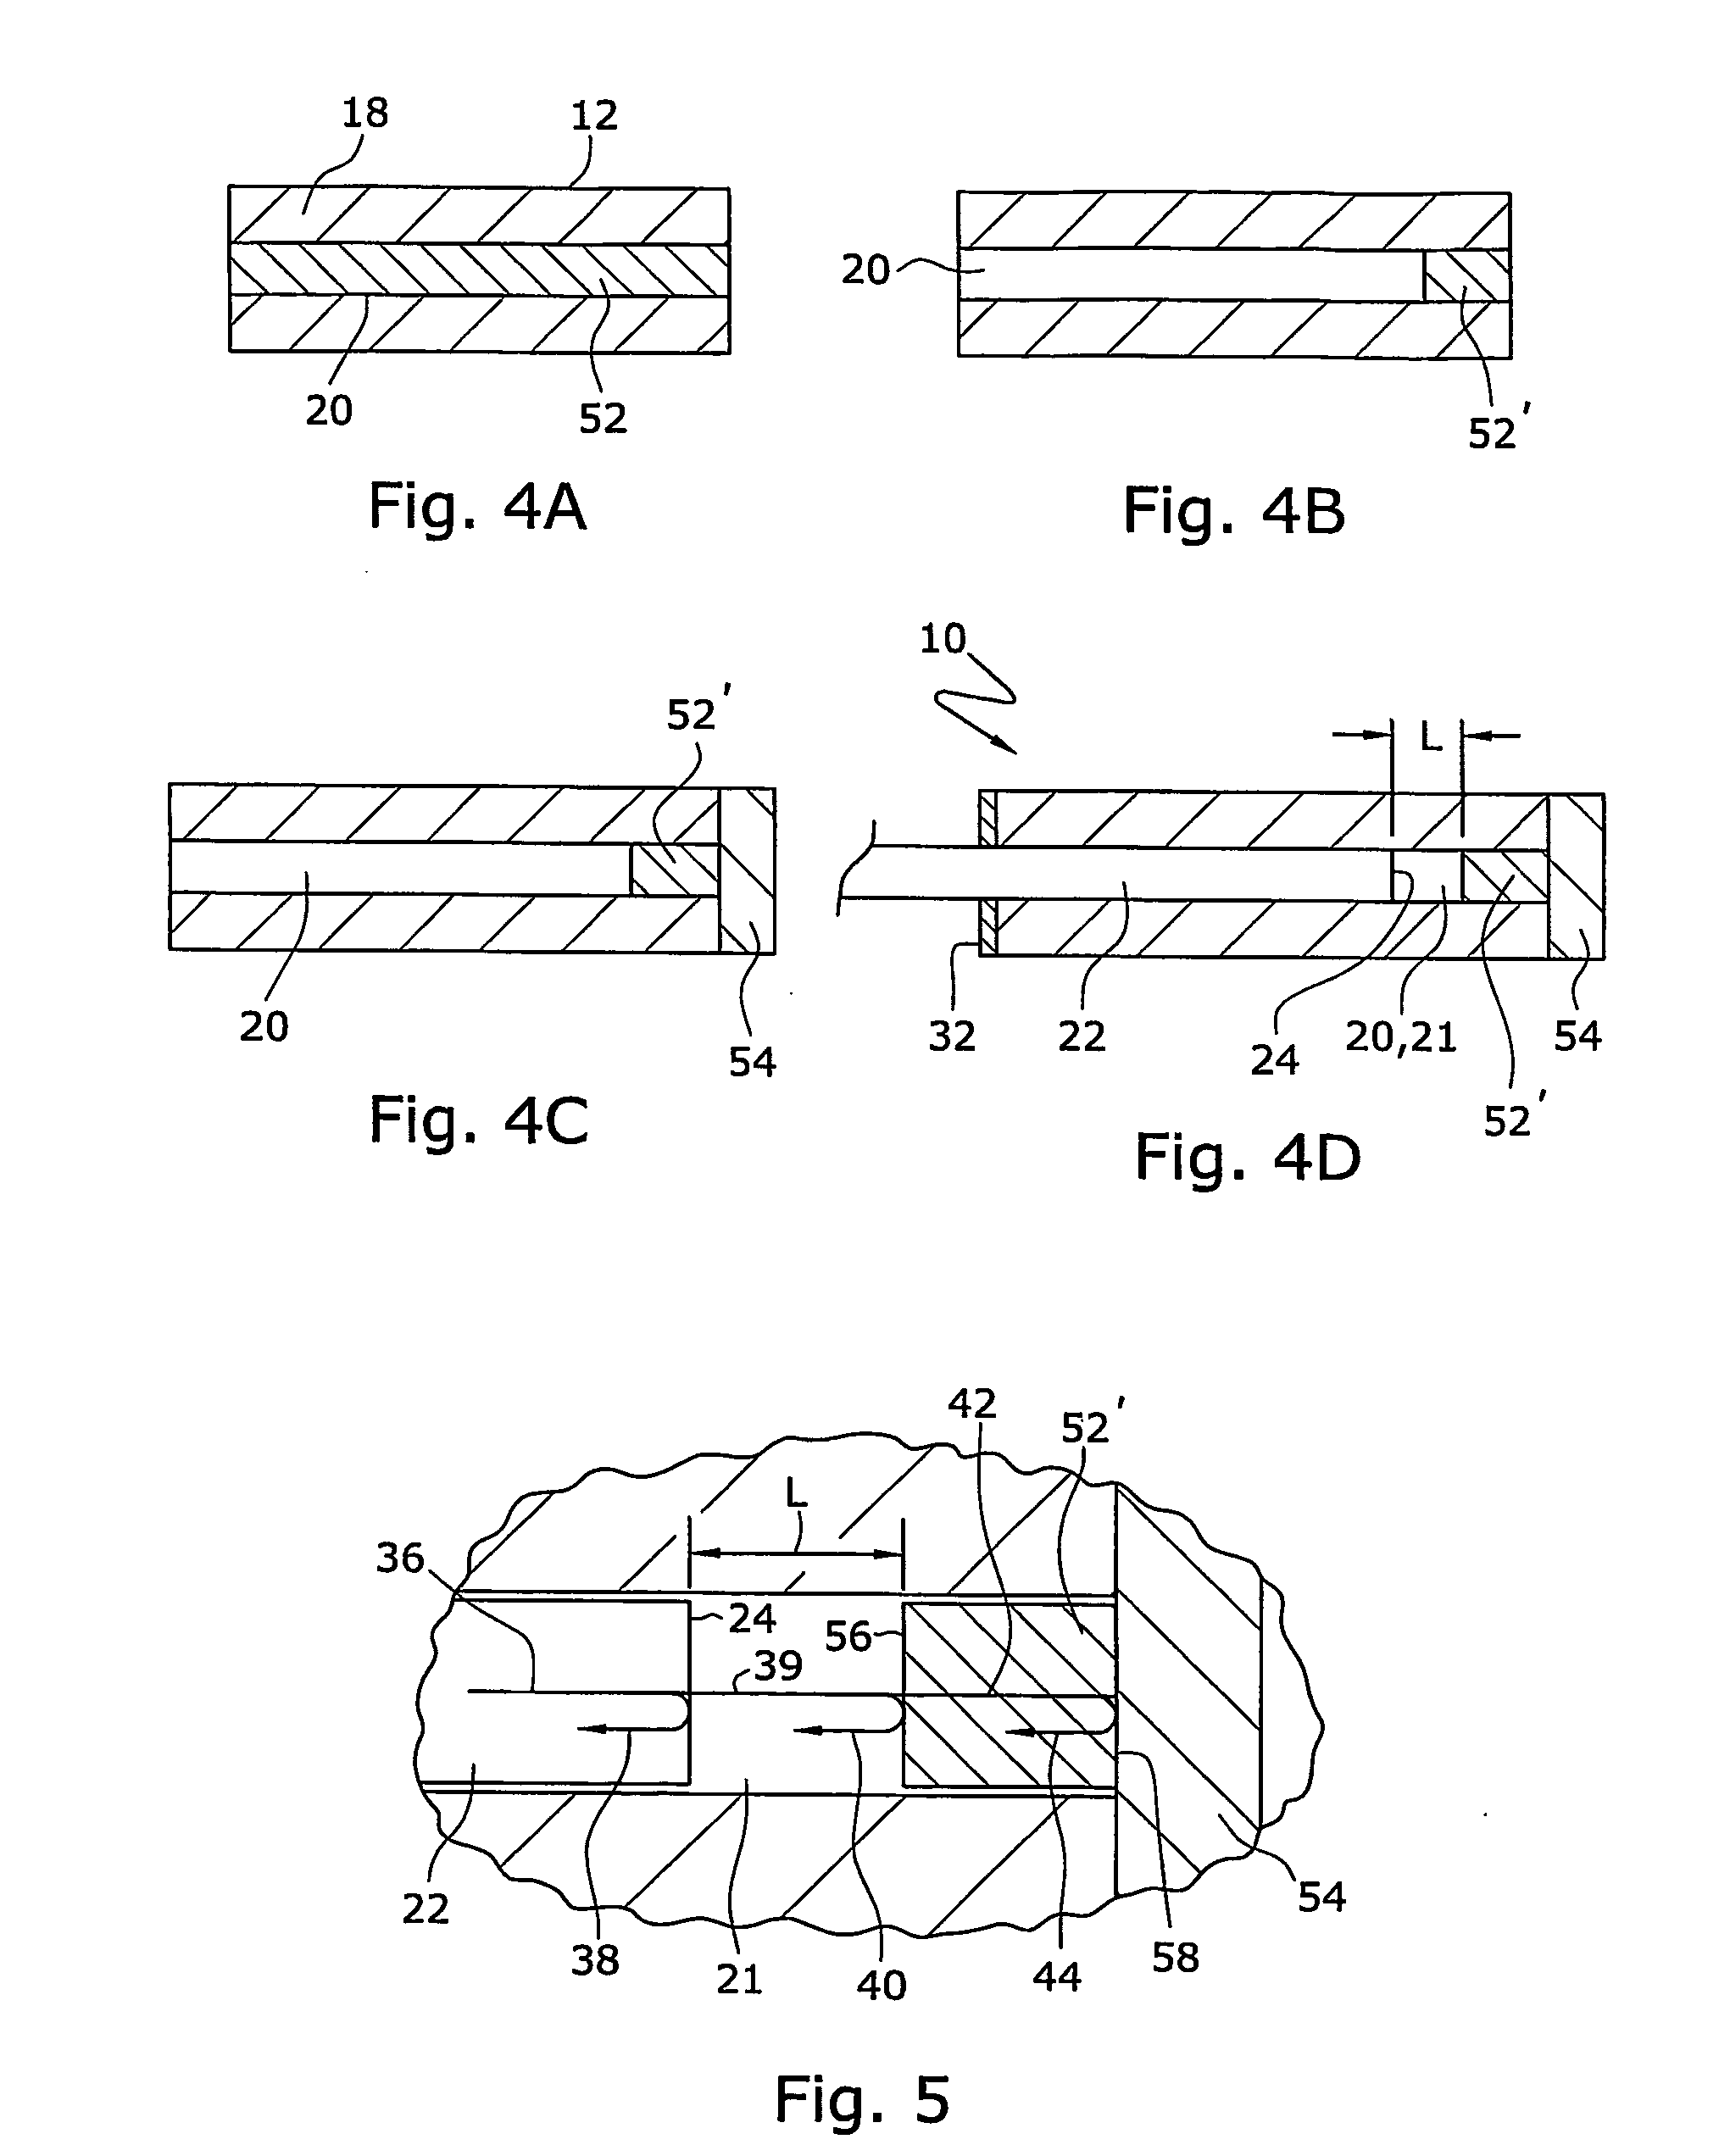 Optical sensor with co-located pressure and temperature sensors